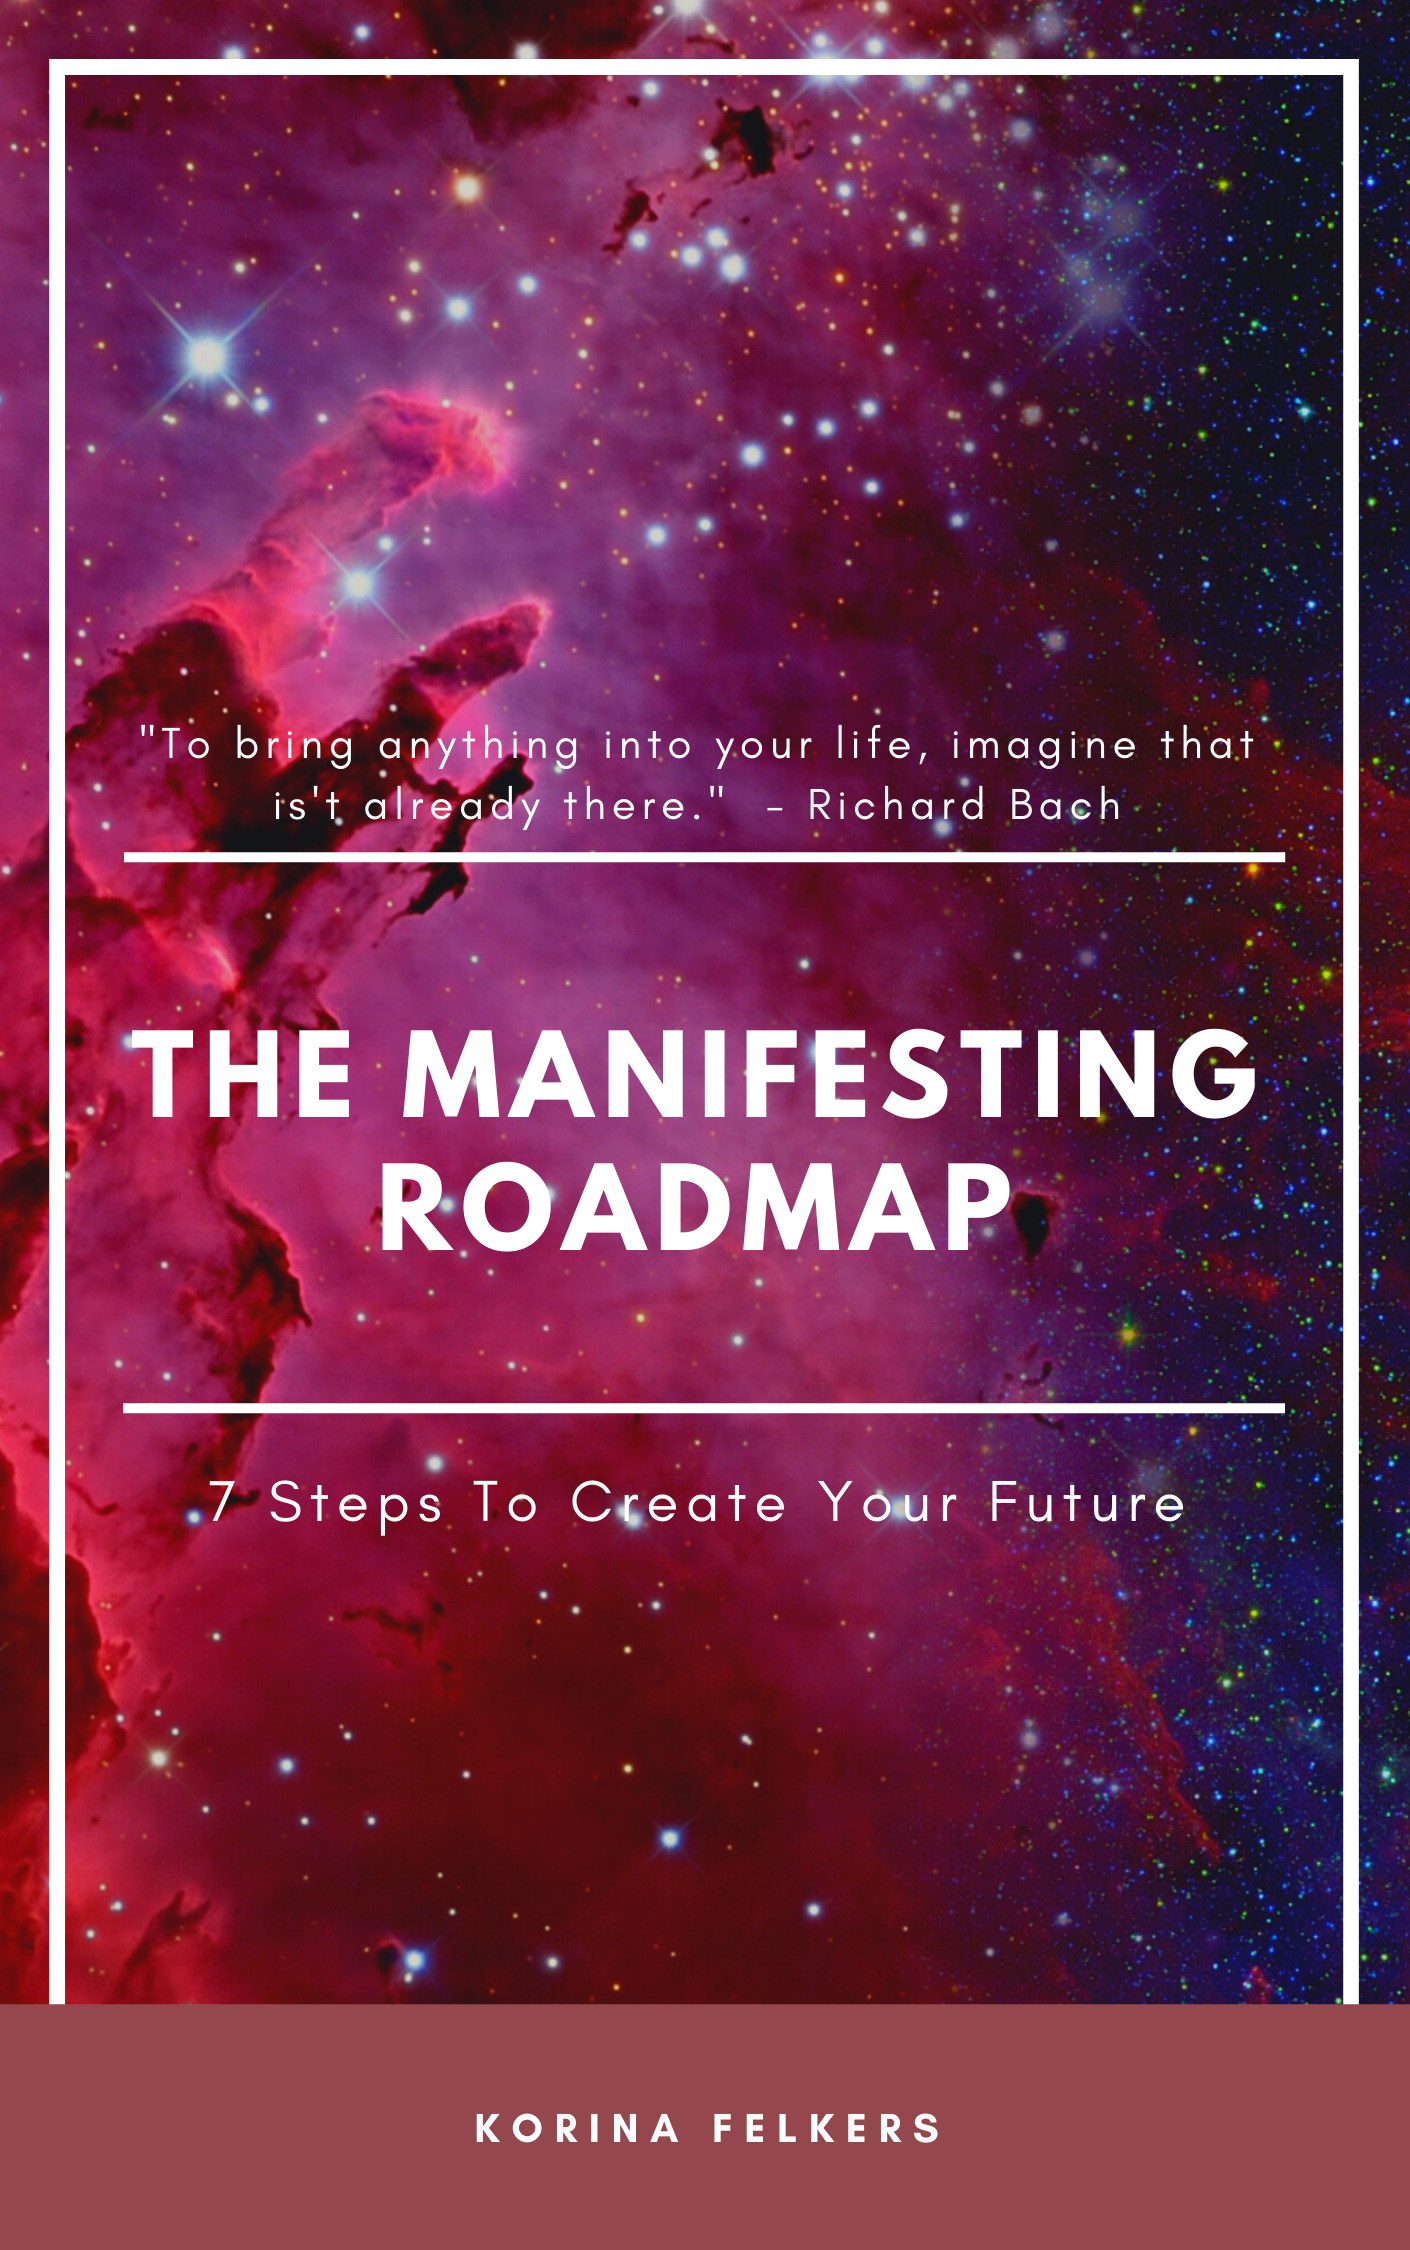 Manifesting Roadmap - 7 Steps to Create Your Future